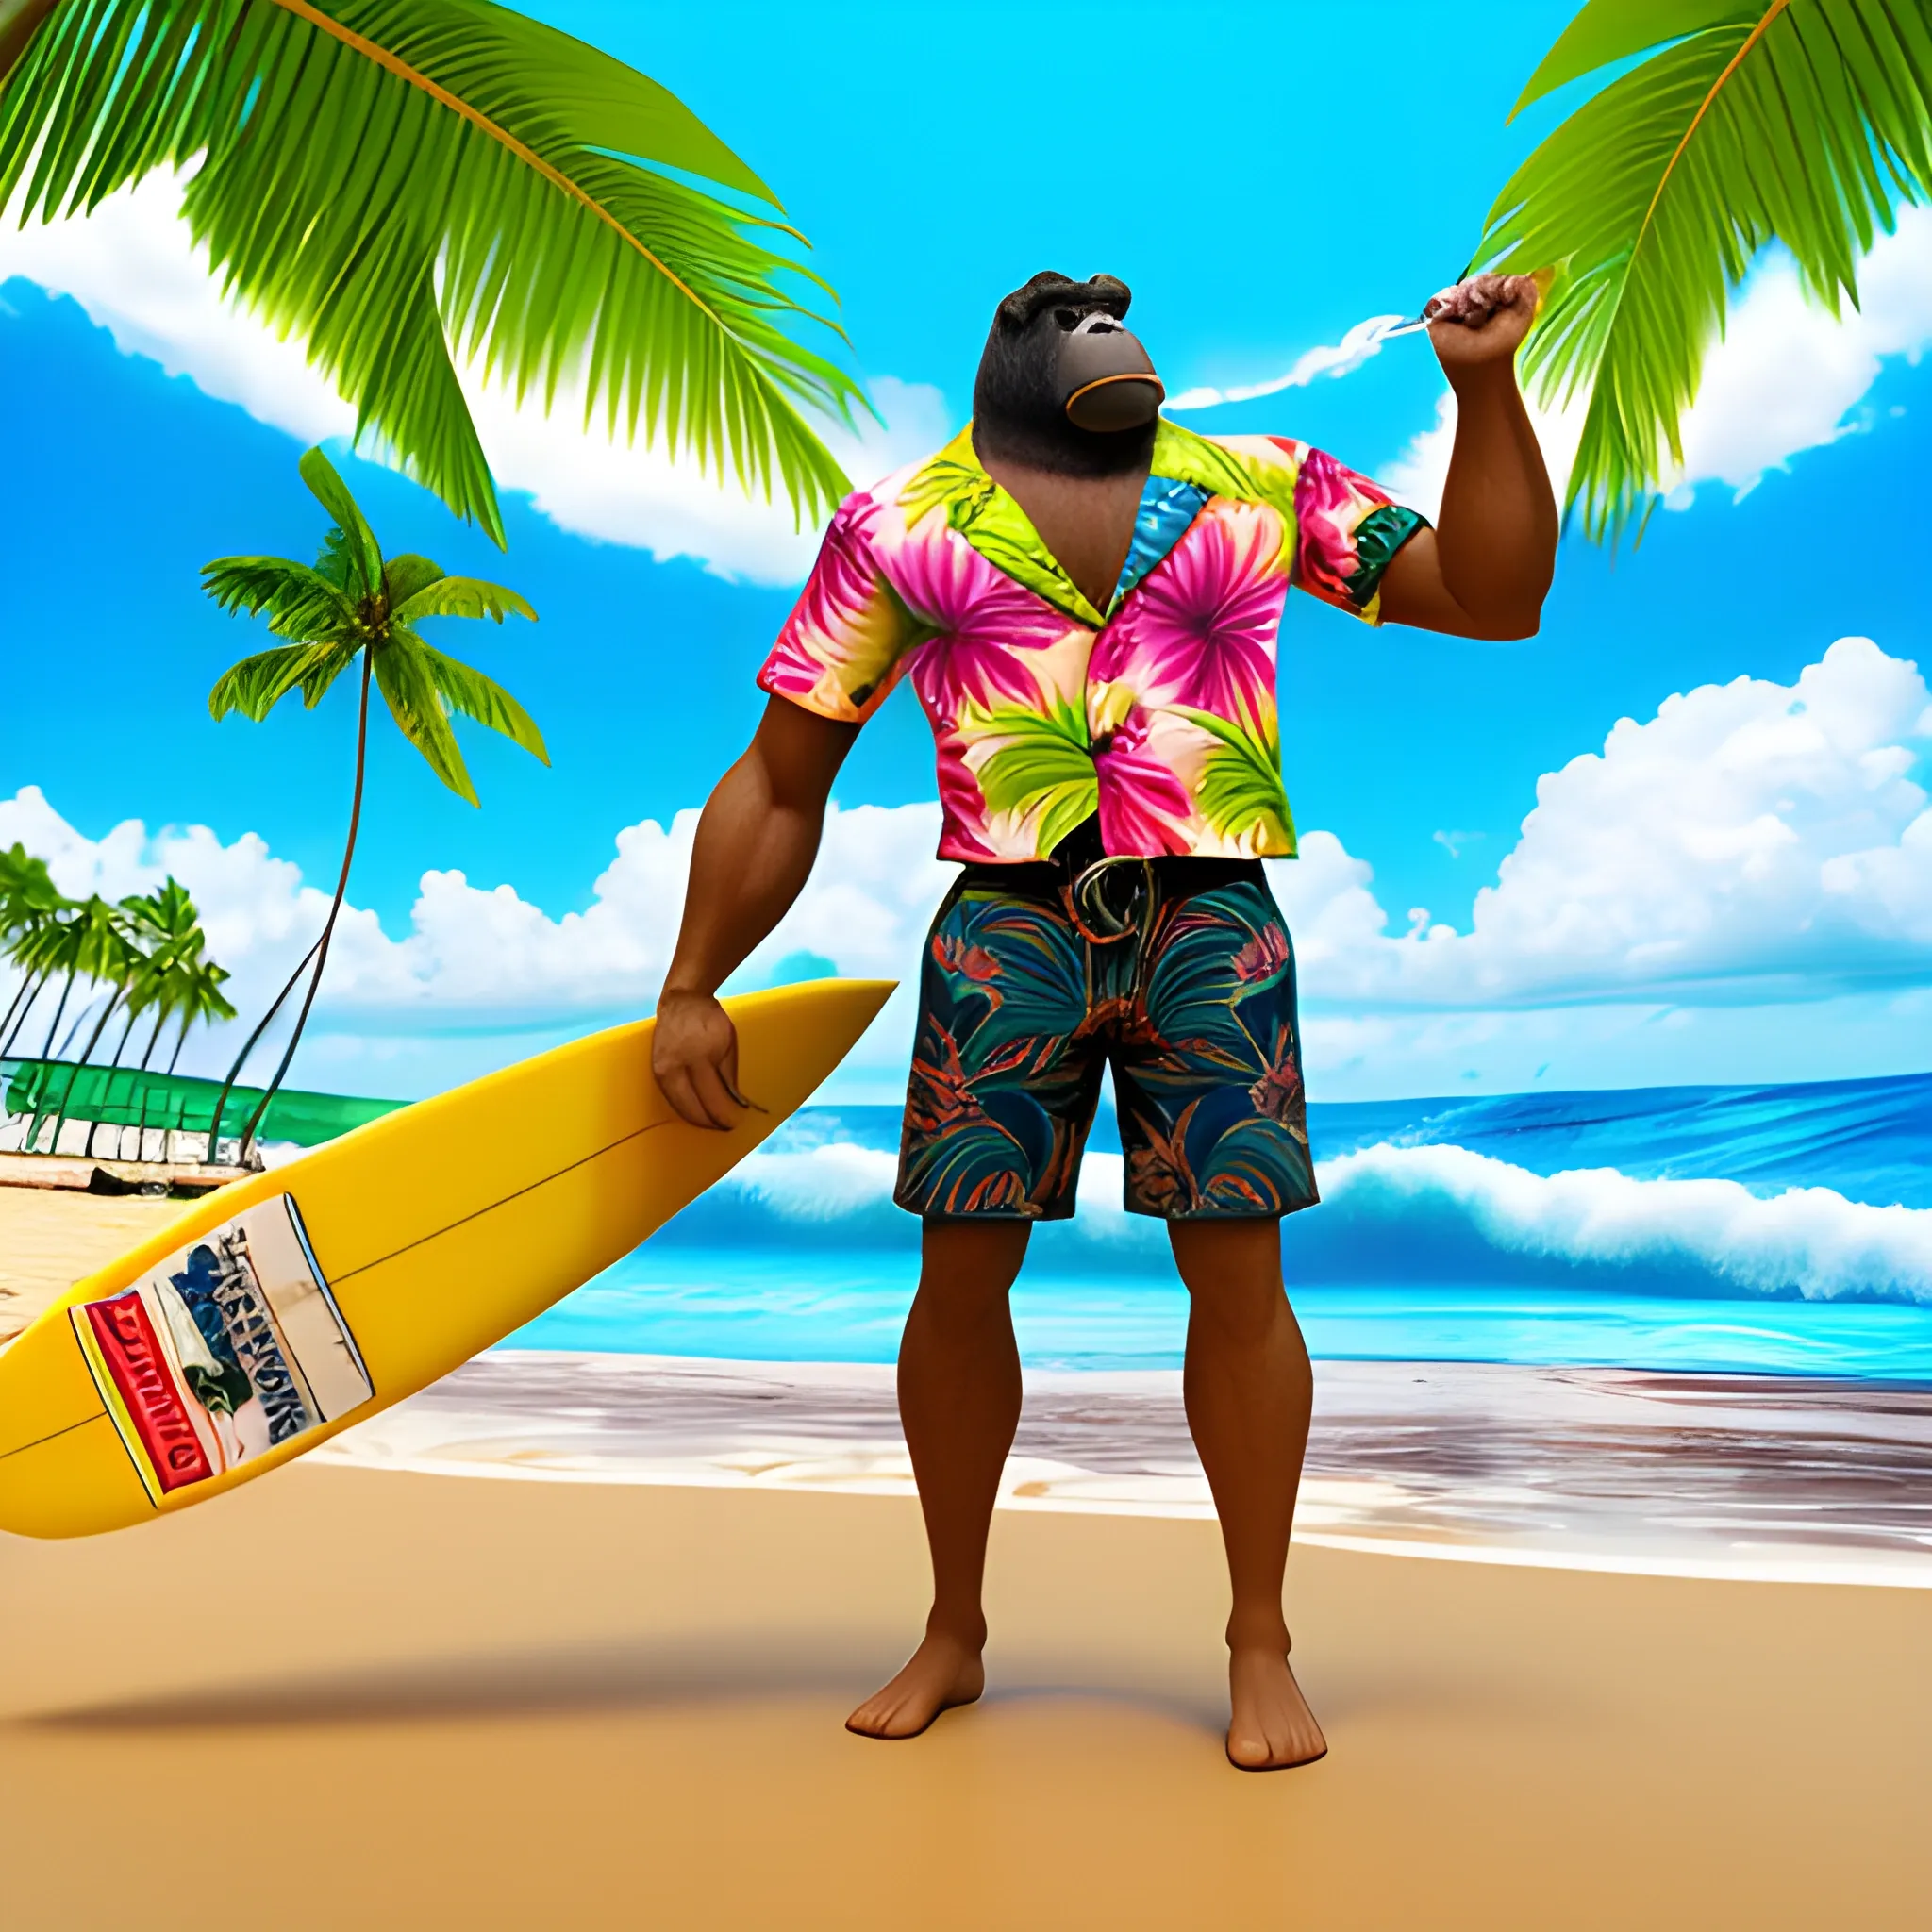 surfing male gorilla with hawaiian colorful shirt, big wave, full body, surfer gorilla, shorts, wave, smoking cigar, surfing on surfboard, big wave, hawaii shirt, cigar, highly detailed, photographic, sunny island background, palms, sand beach, 3D